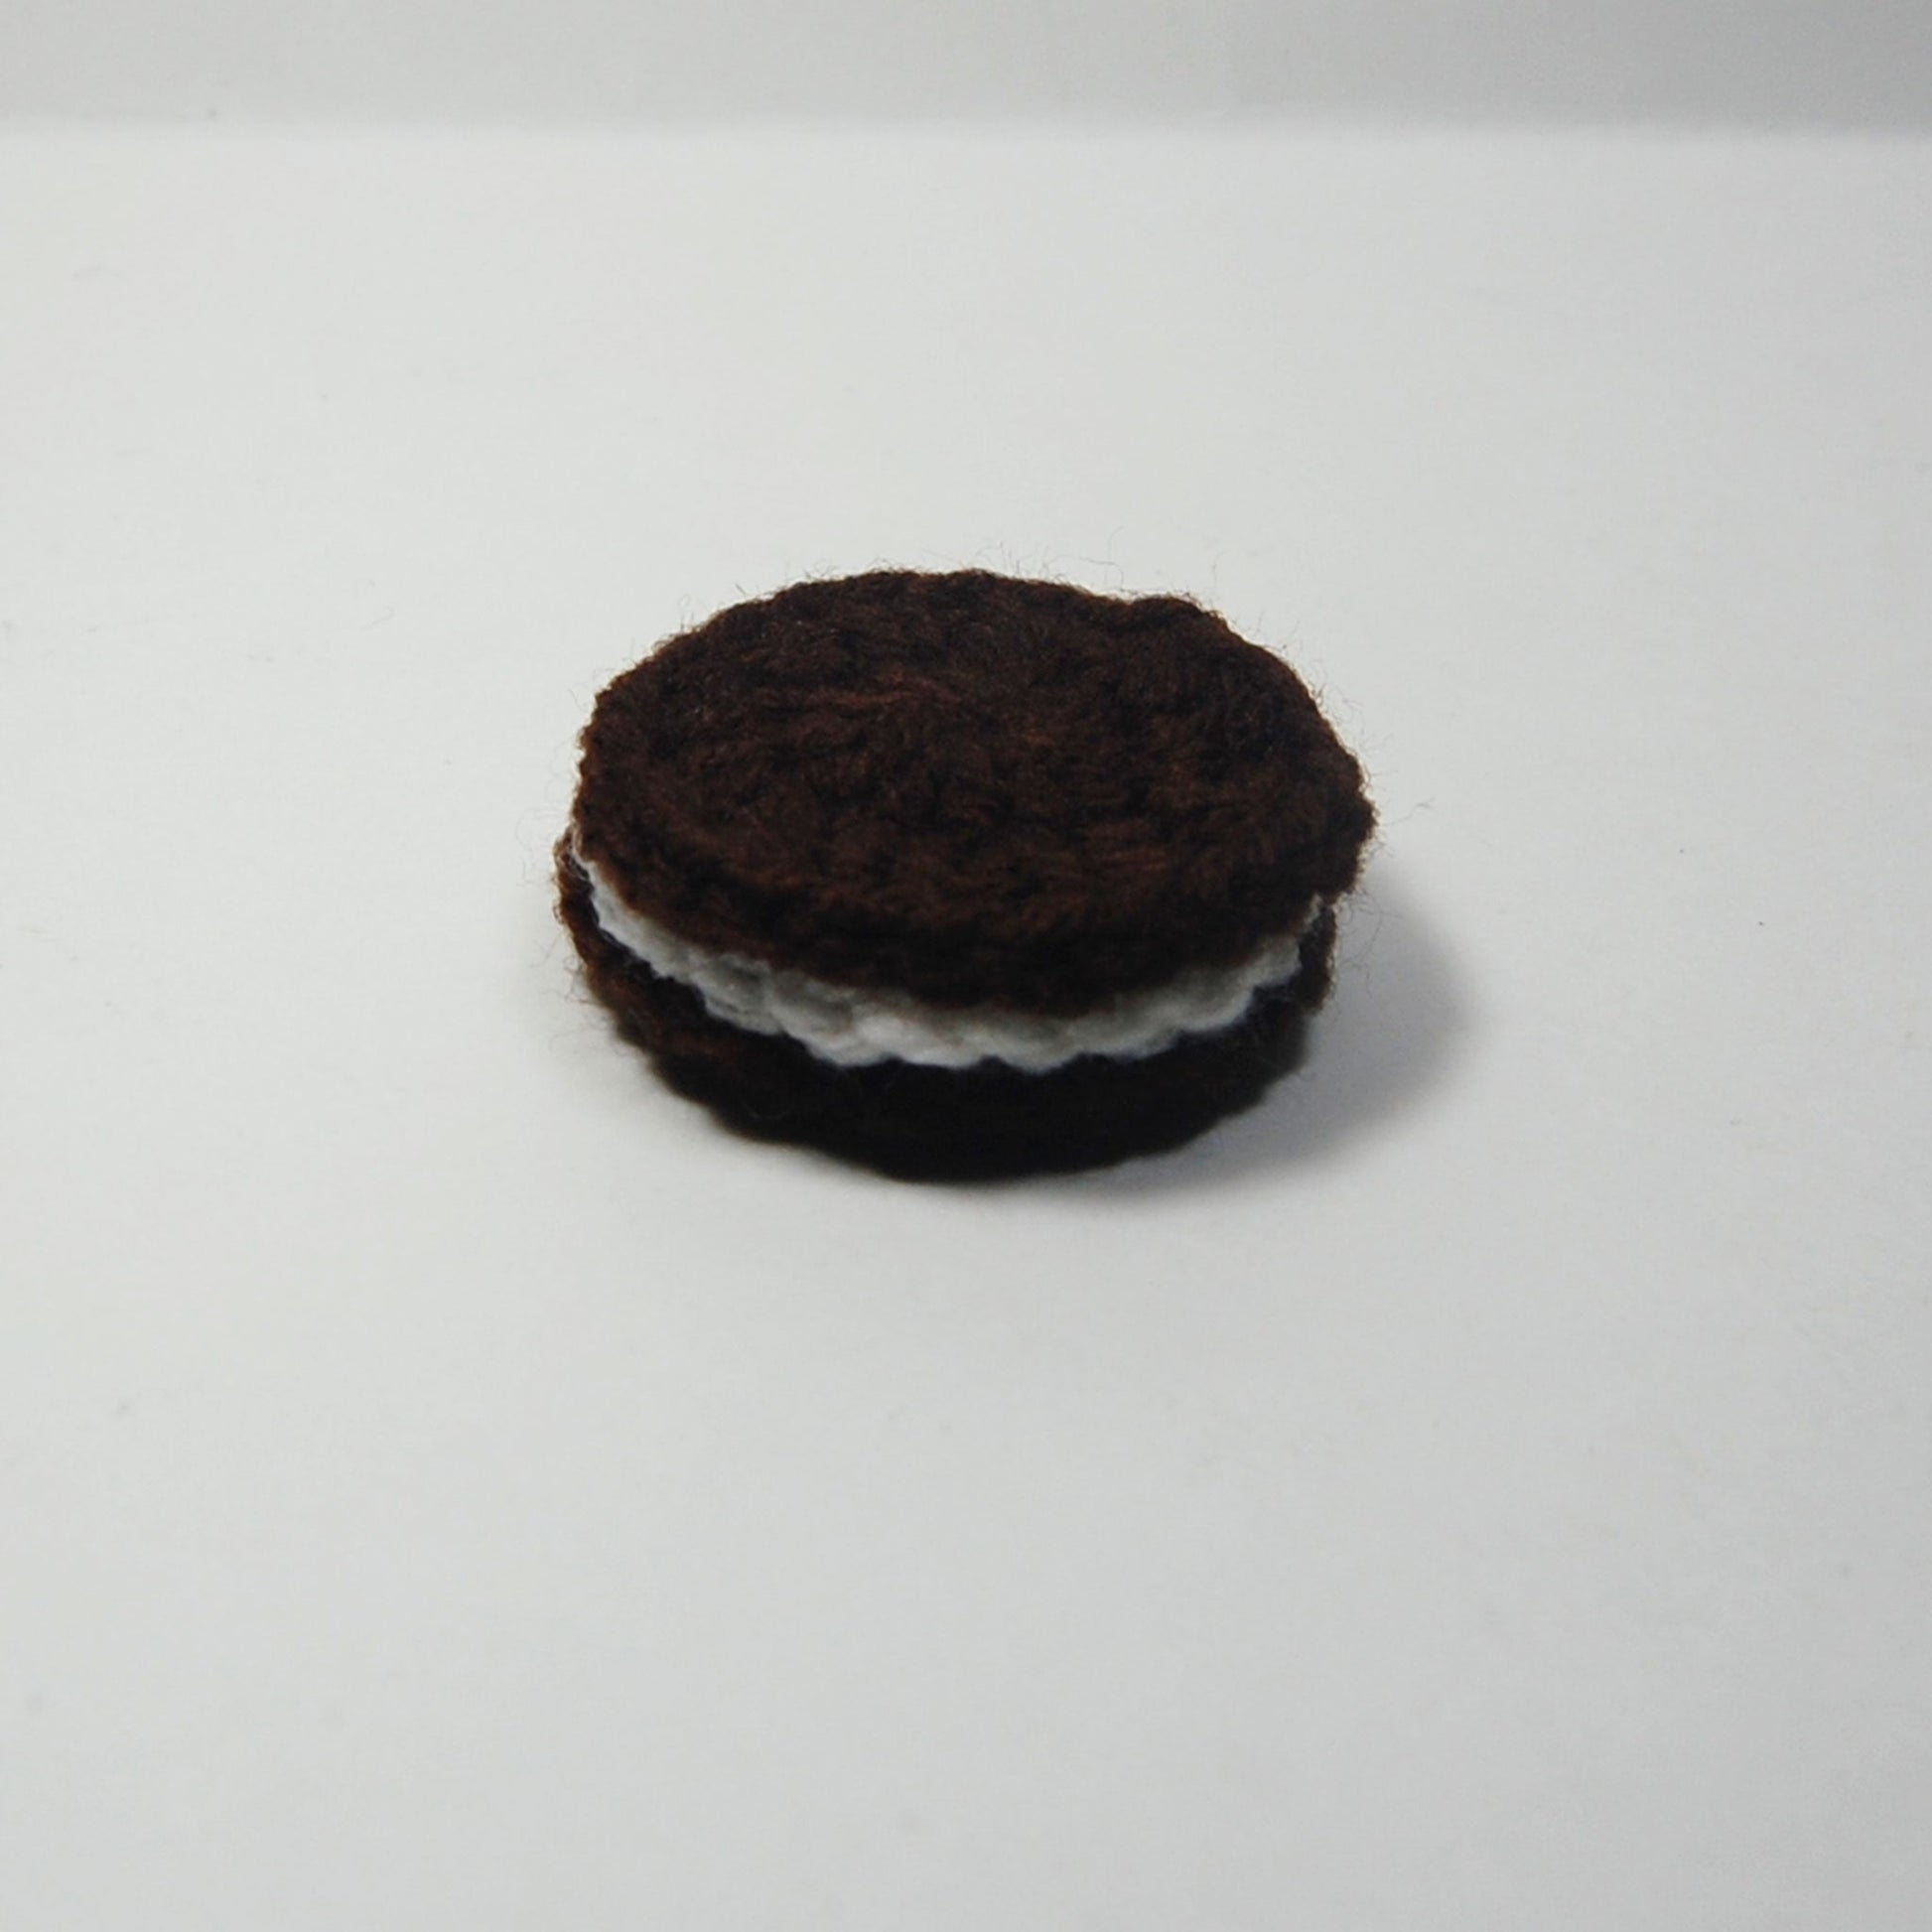 single chocolate sandwhich crocheted cookie